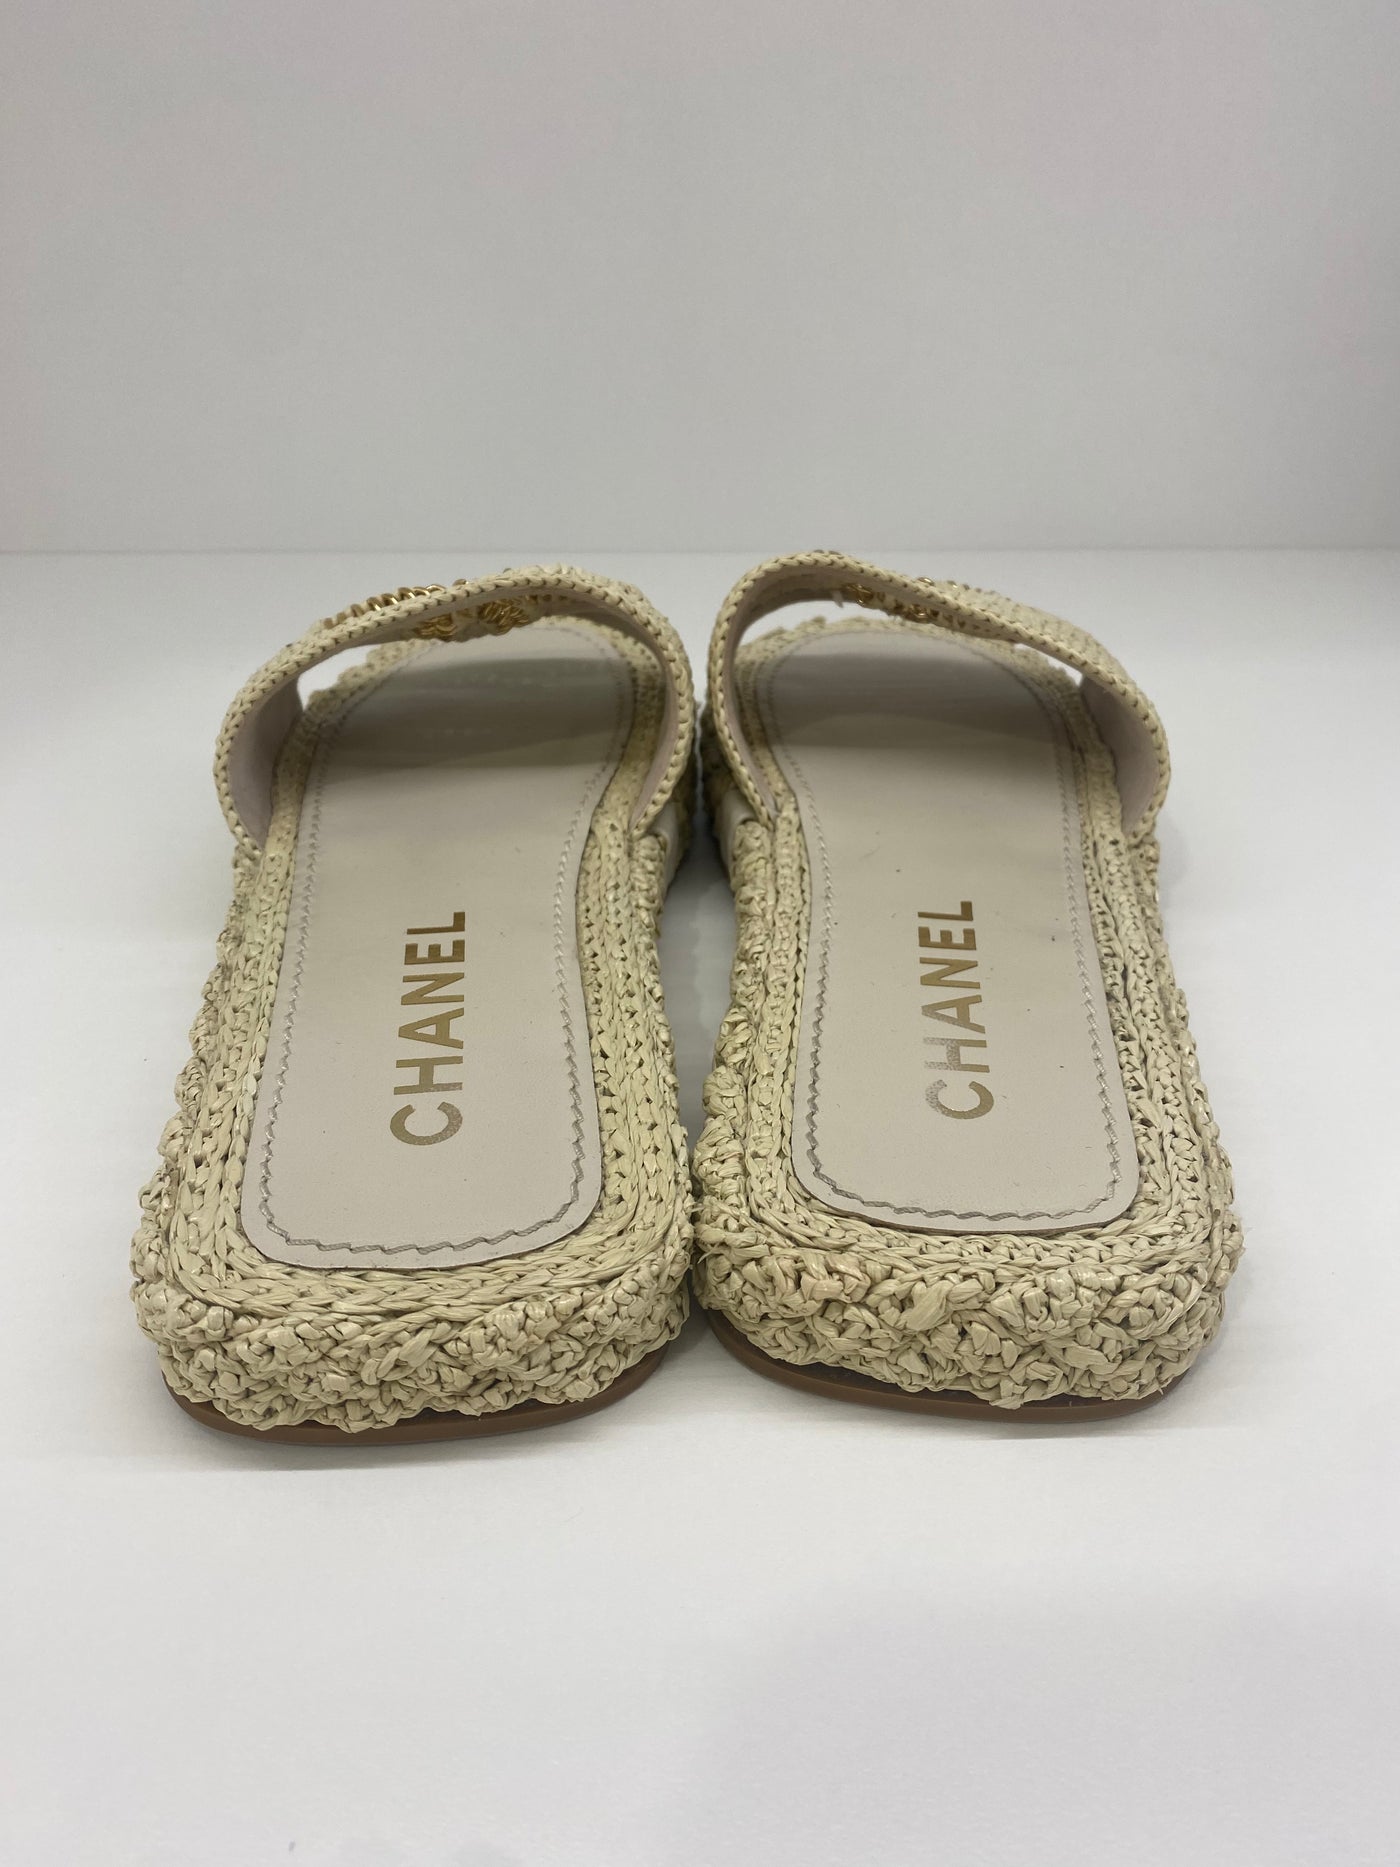 Chanel Beige Woven and Chain Slides Size 41 - SOLD